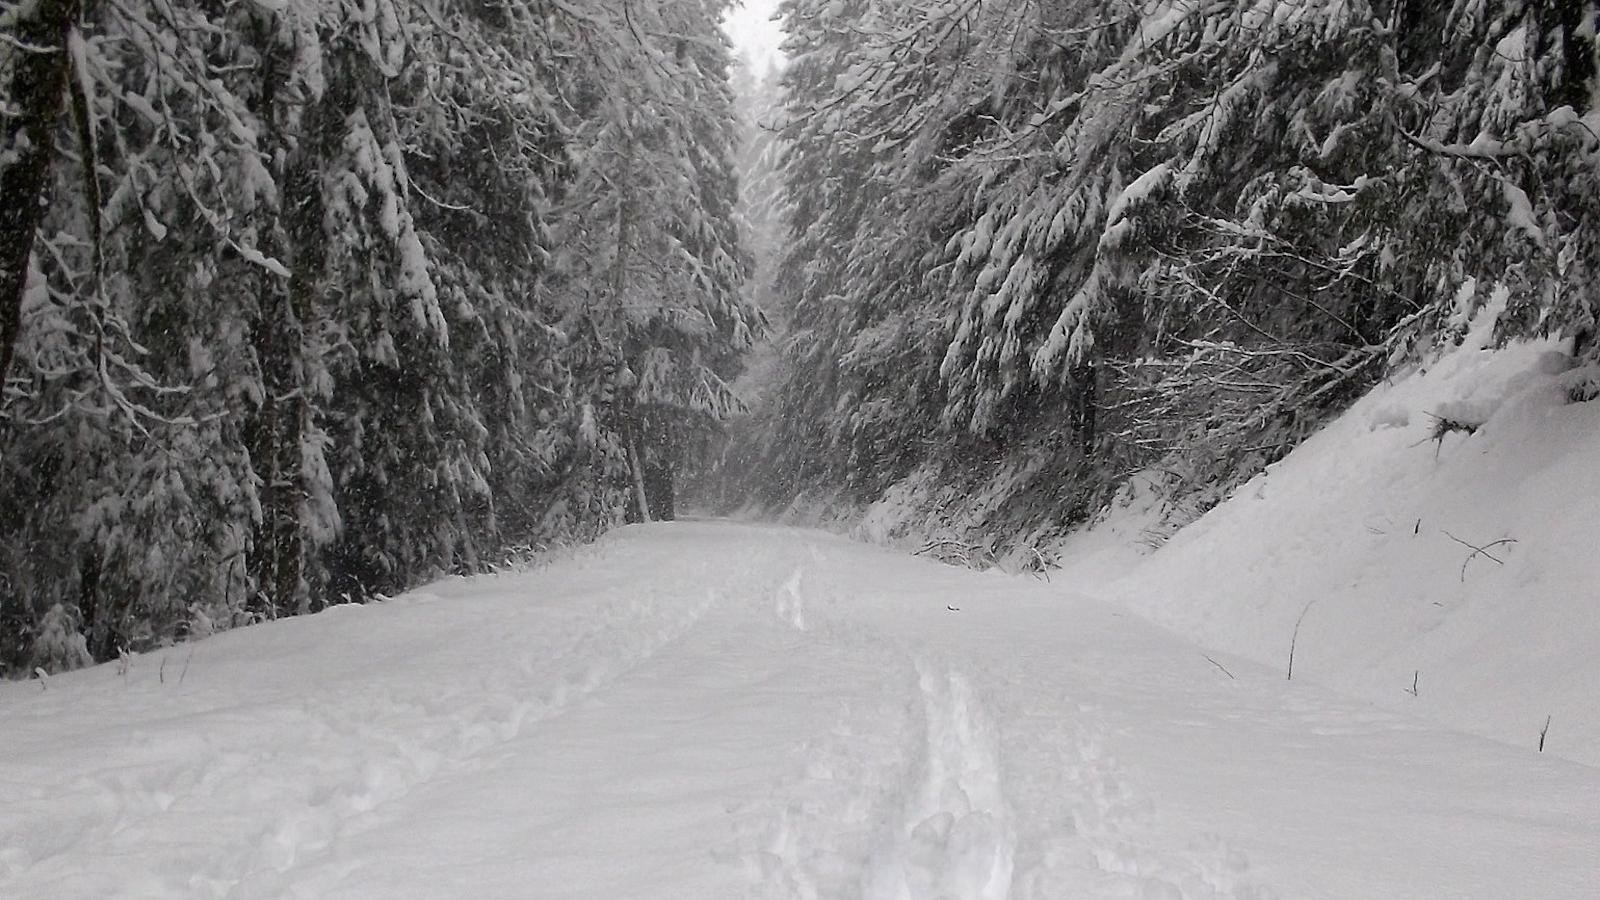 Cross-country ski tracks follow a snowy road surrounded by forest. 